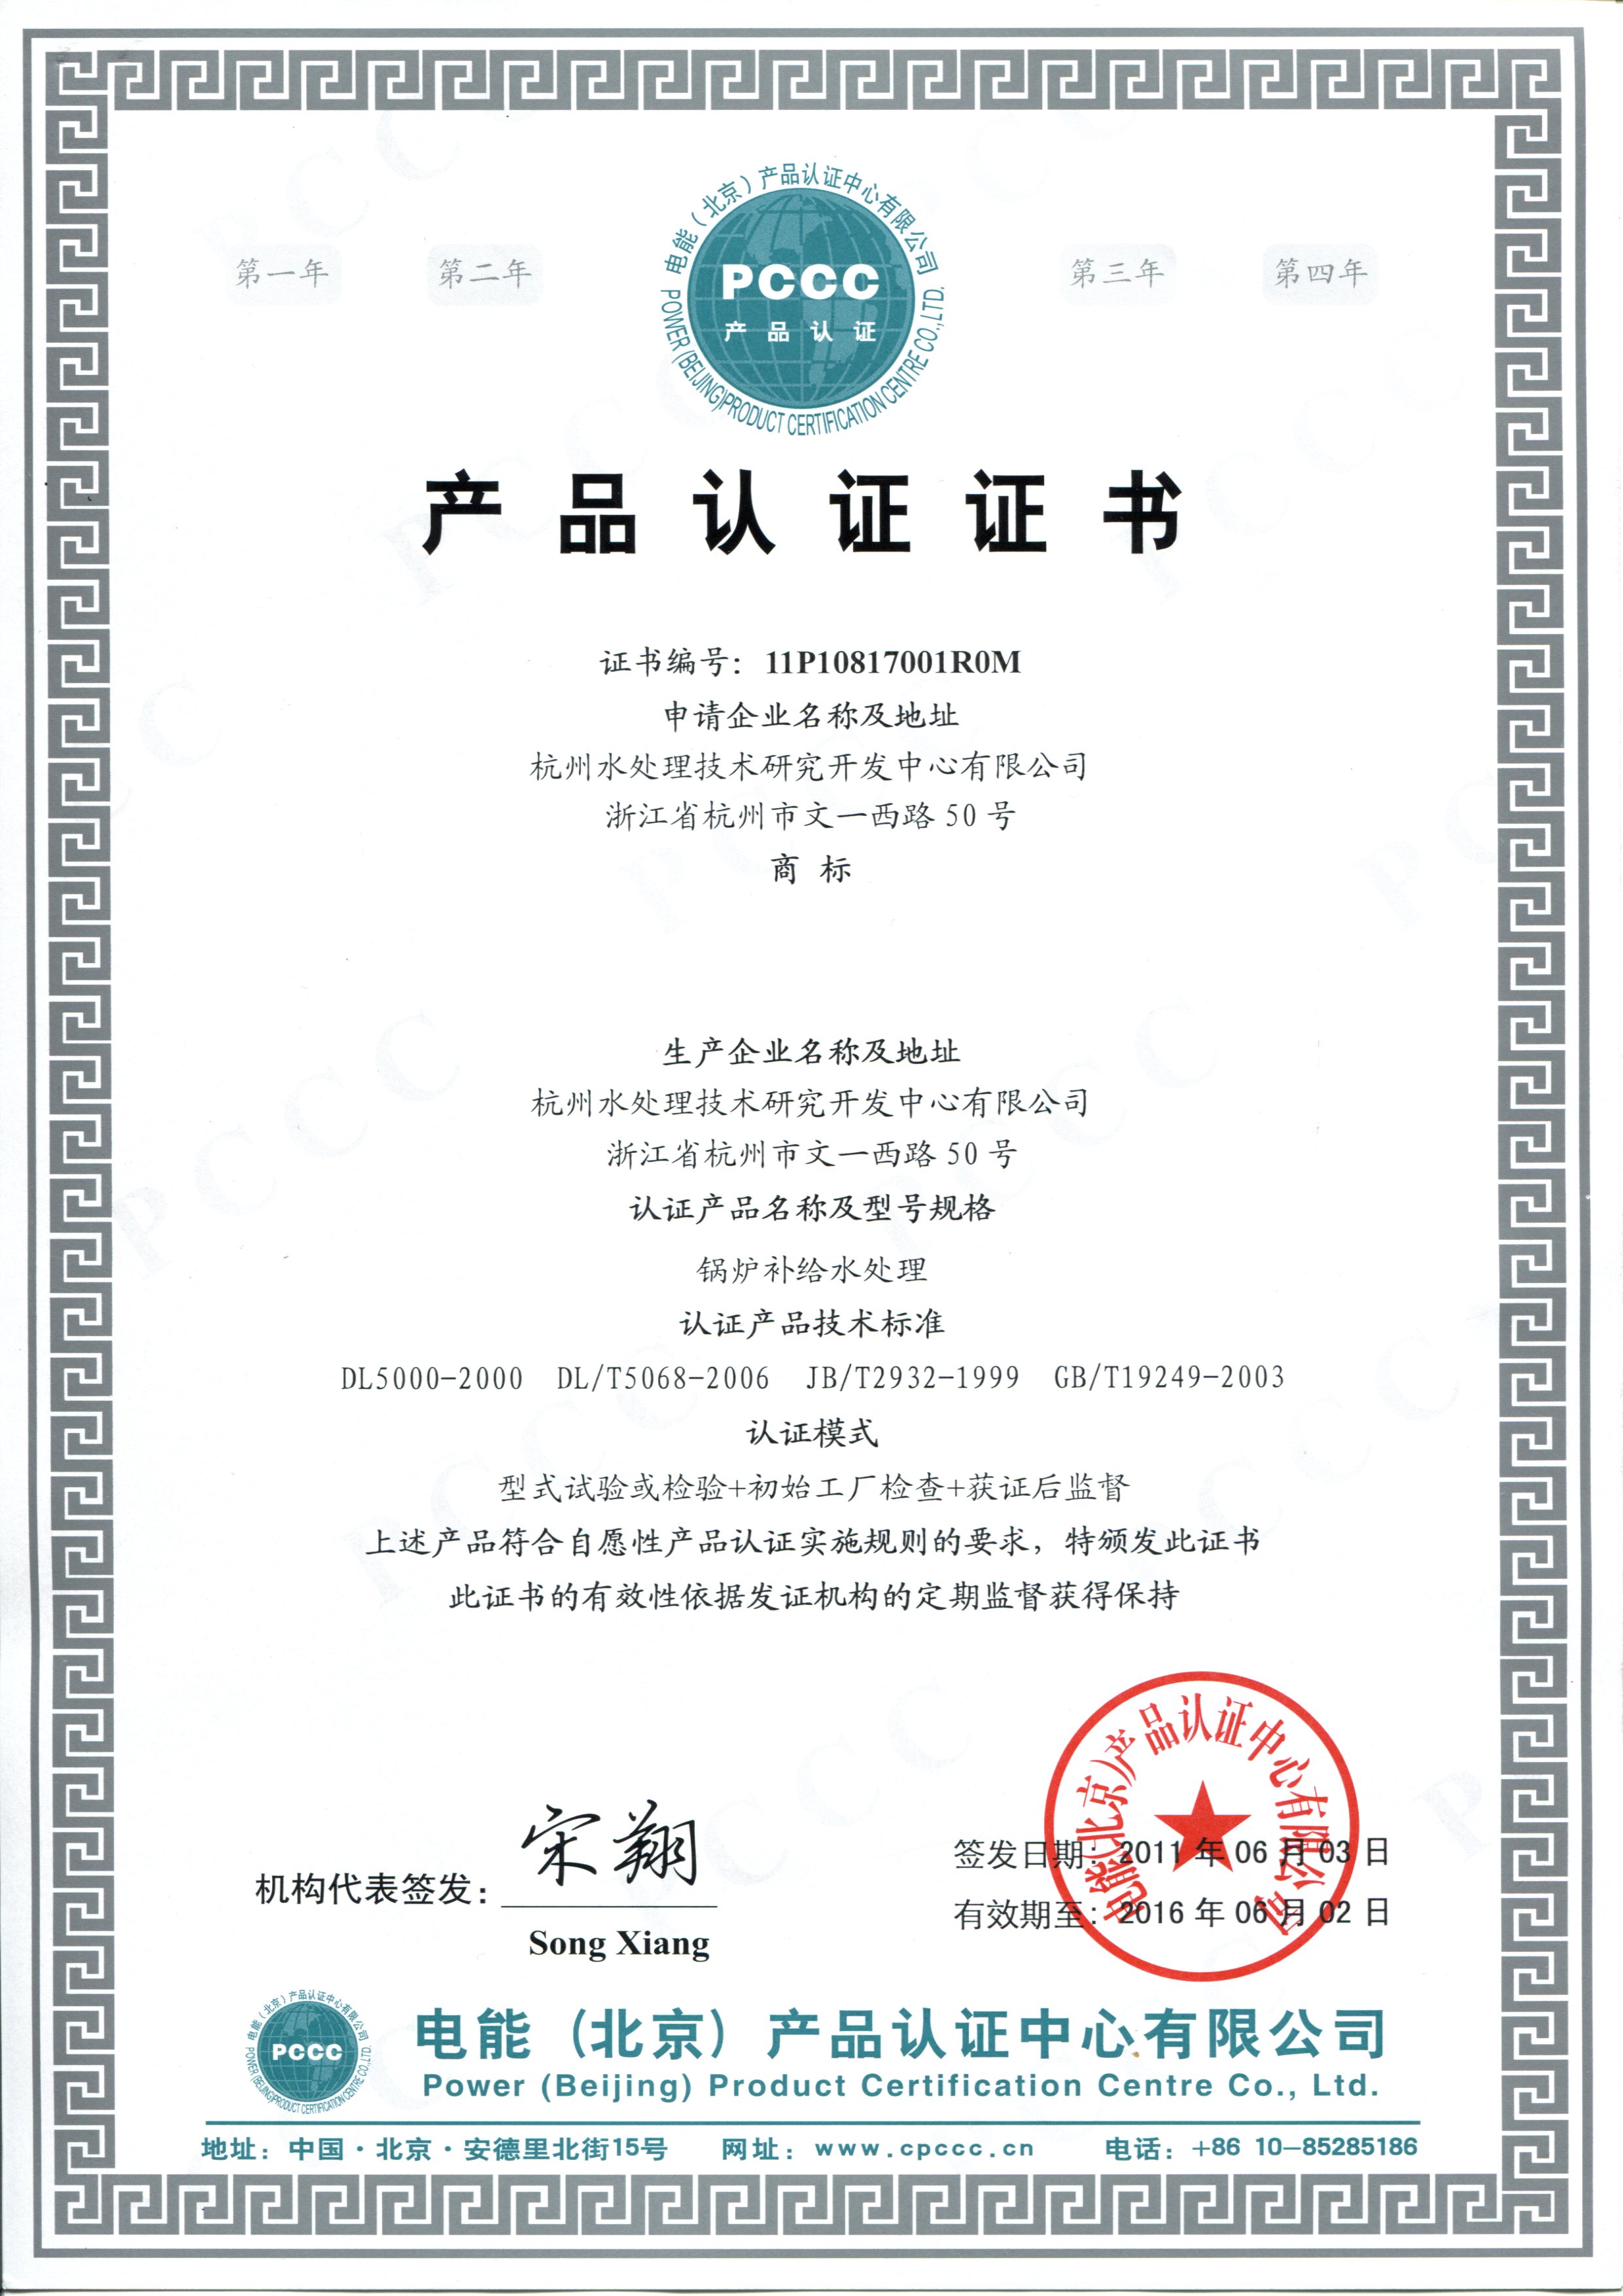 Product Certification for Power Industry Boiler Feed Water Treatment